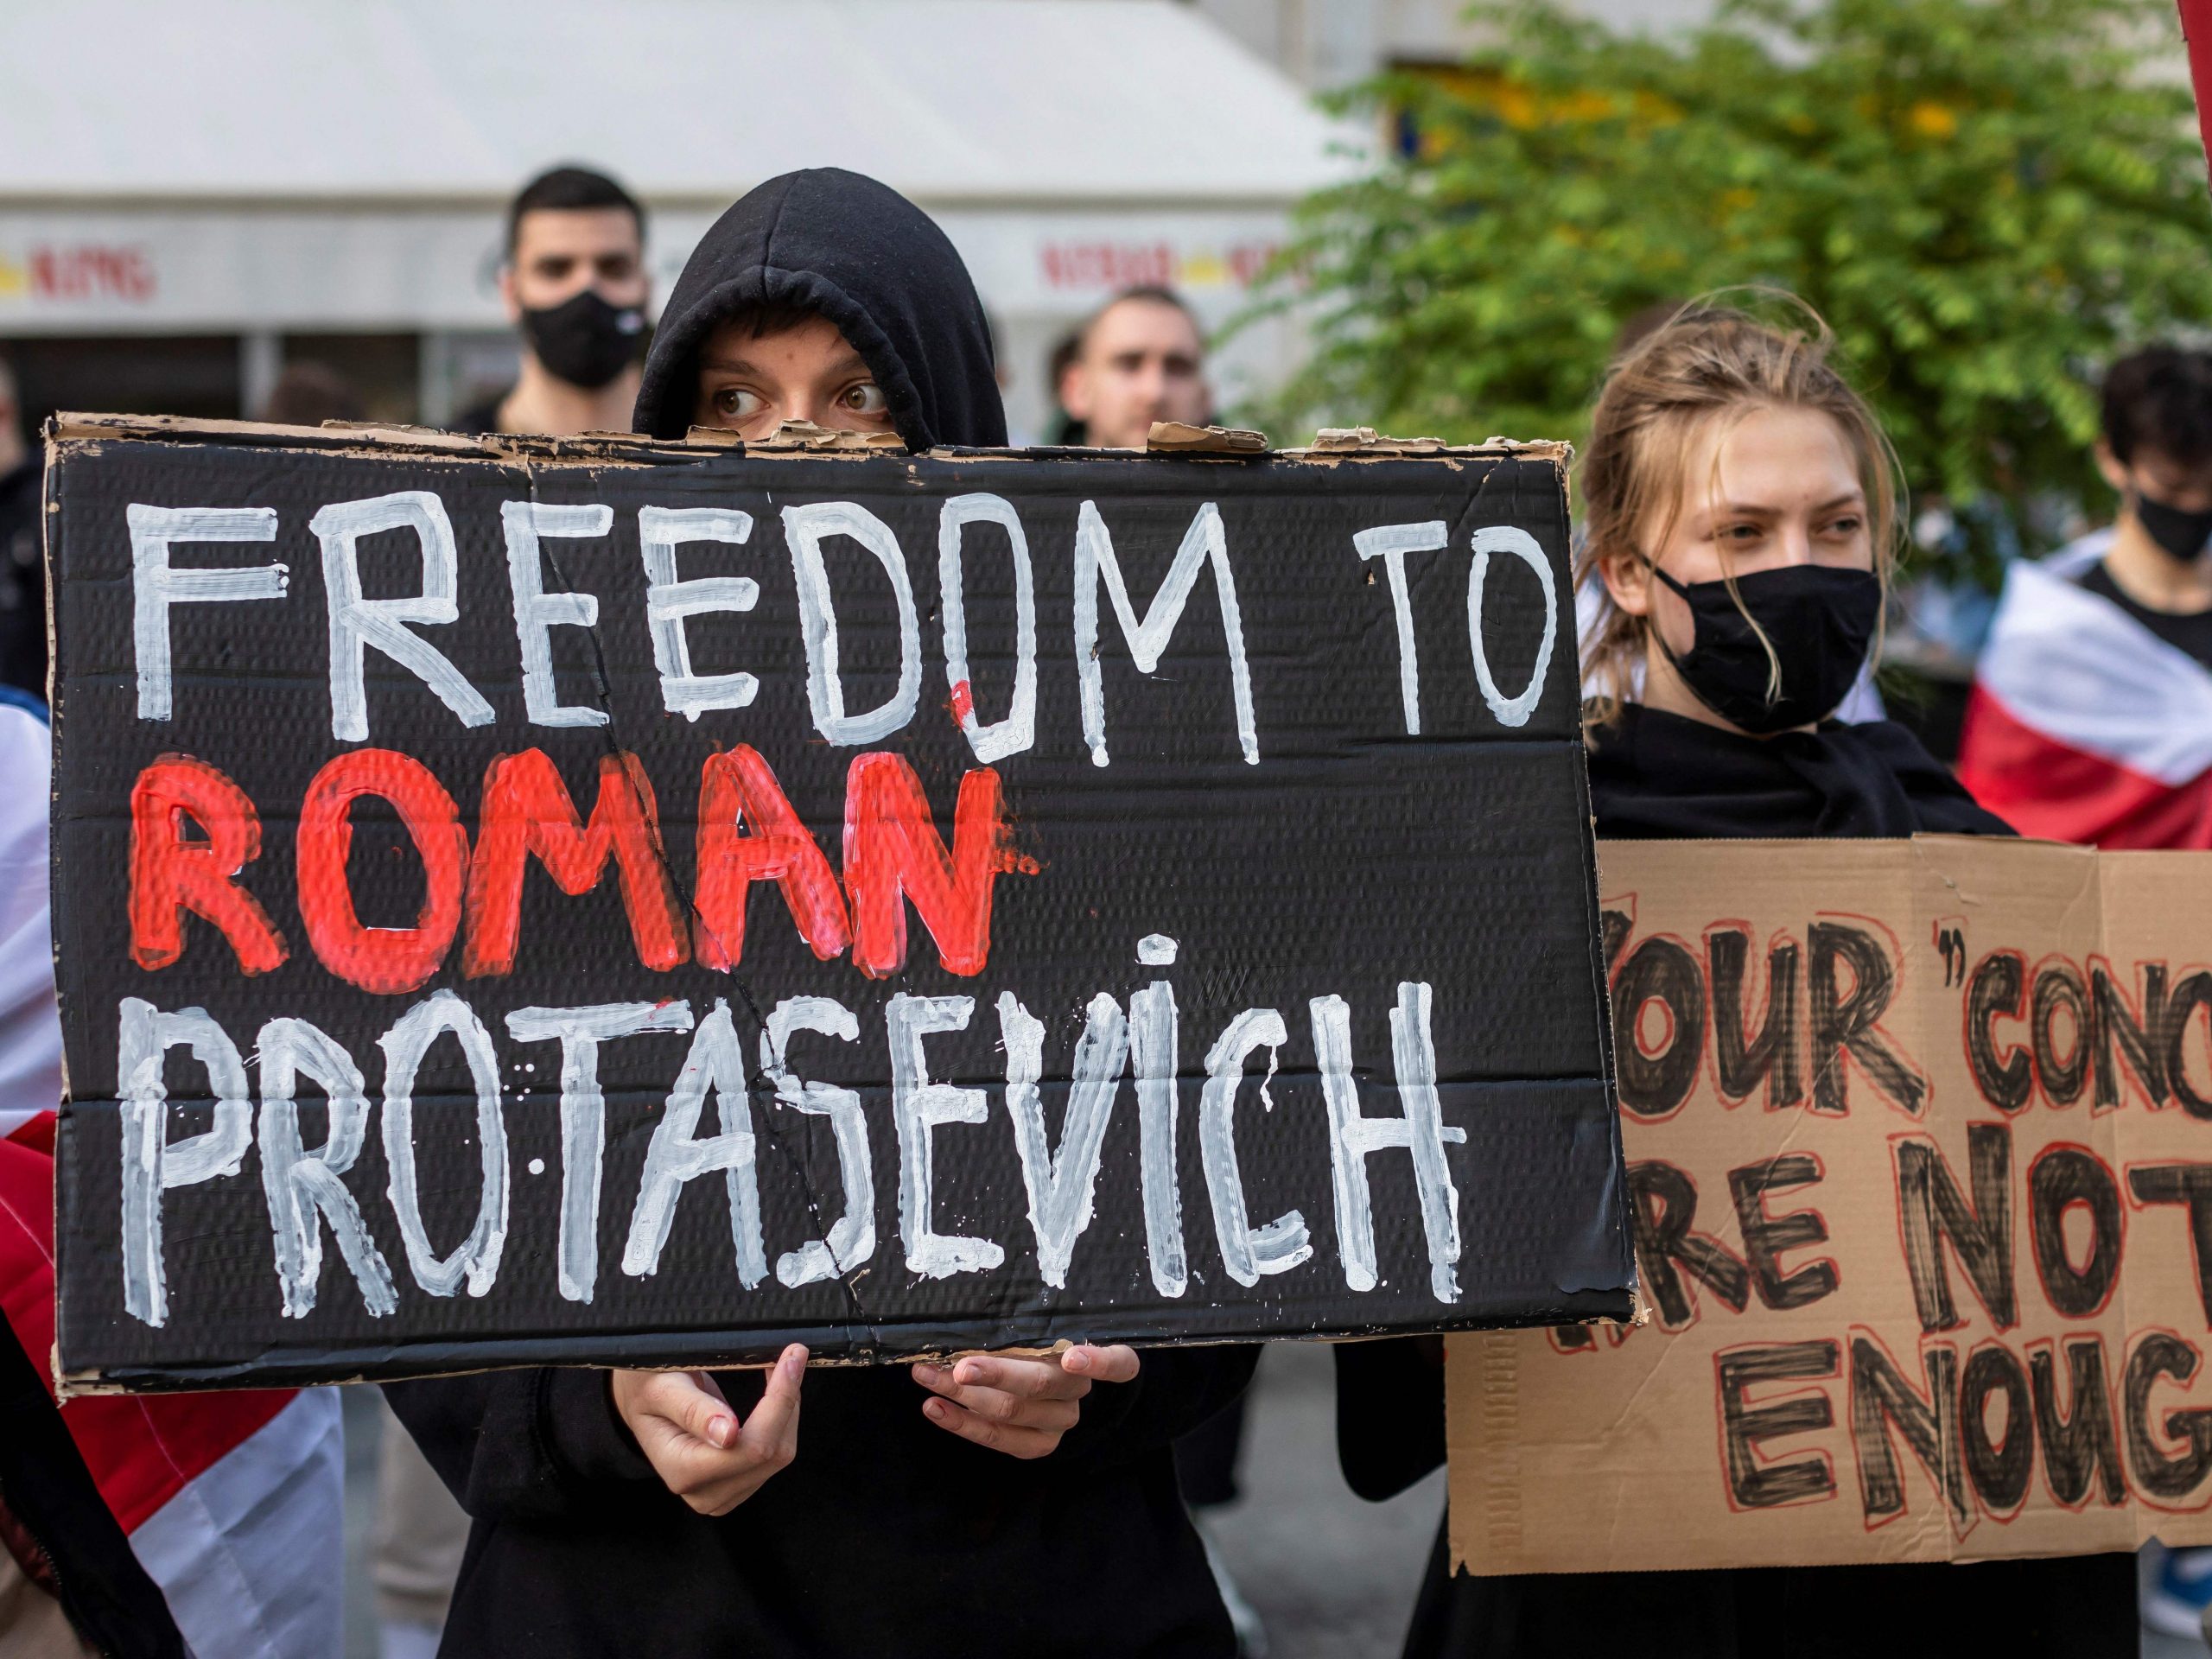 Protestors in Poland demand the release of Belarusian dissident Roman Protasevich.